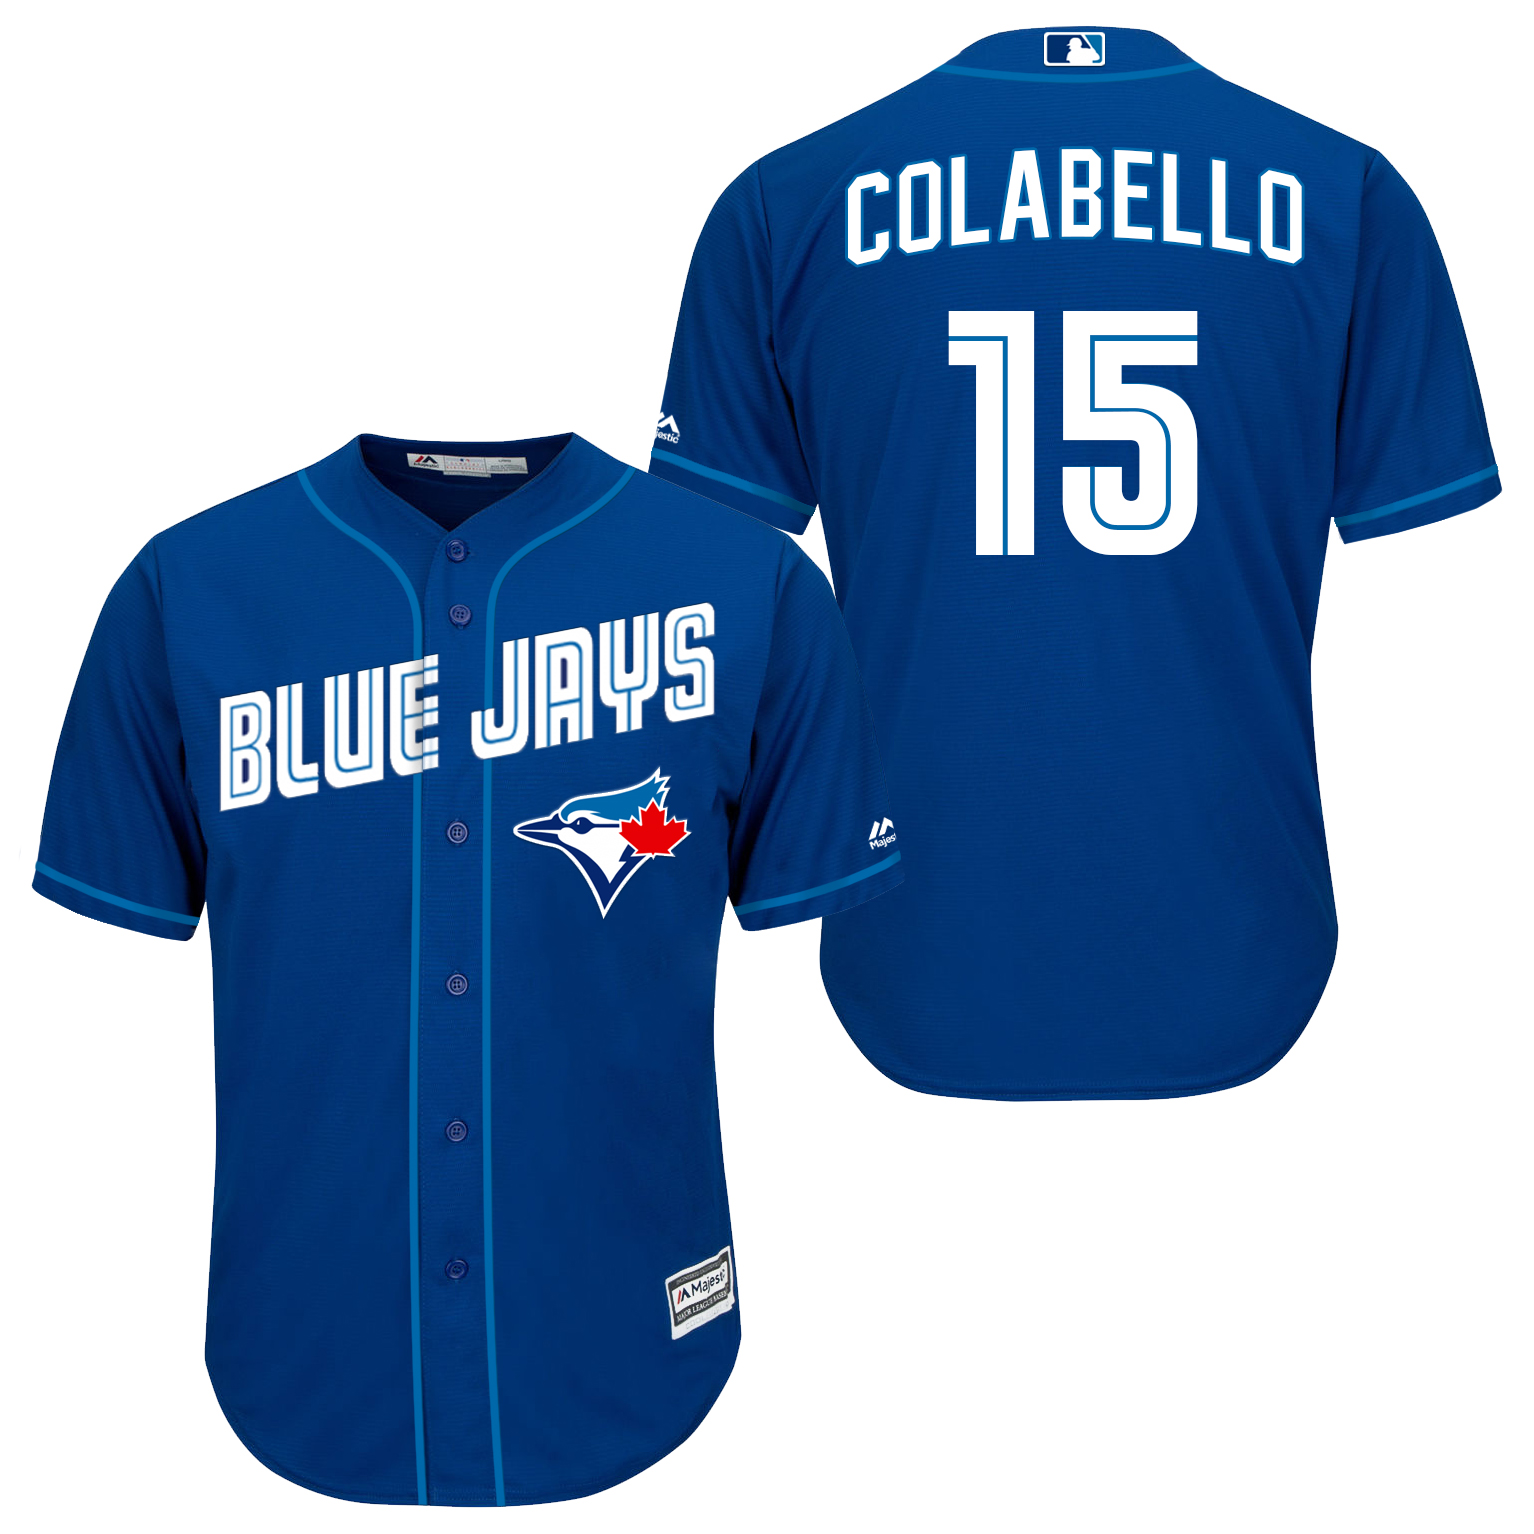 Blue Jays 15 Chris Colabello Navy Blue New Cool Base Jersey